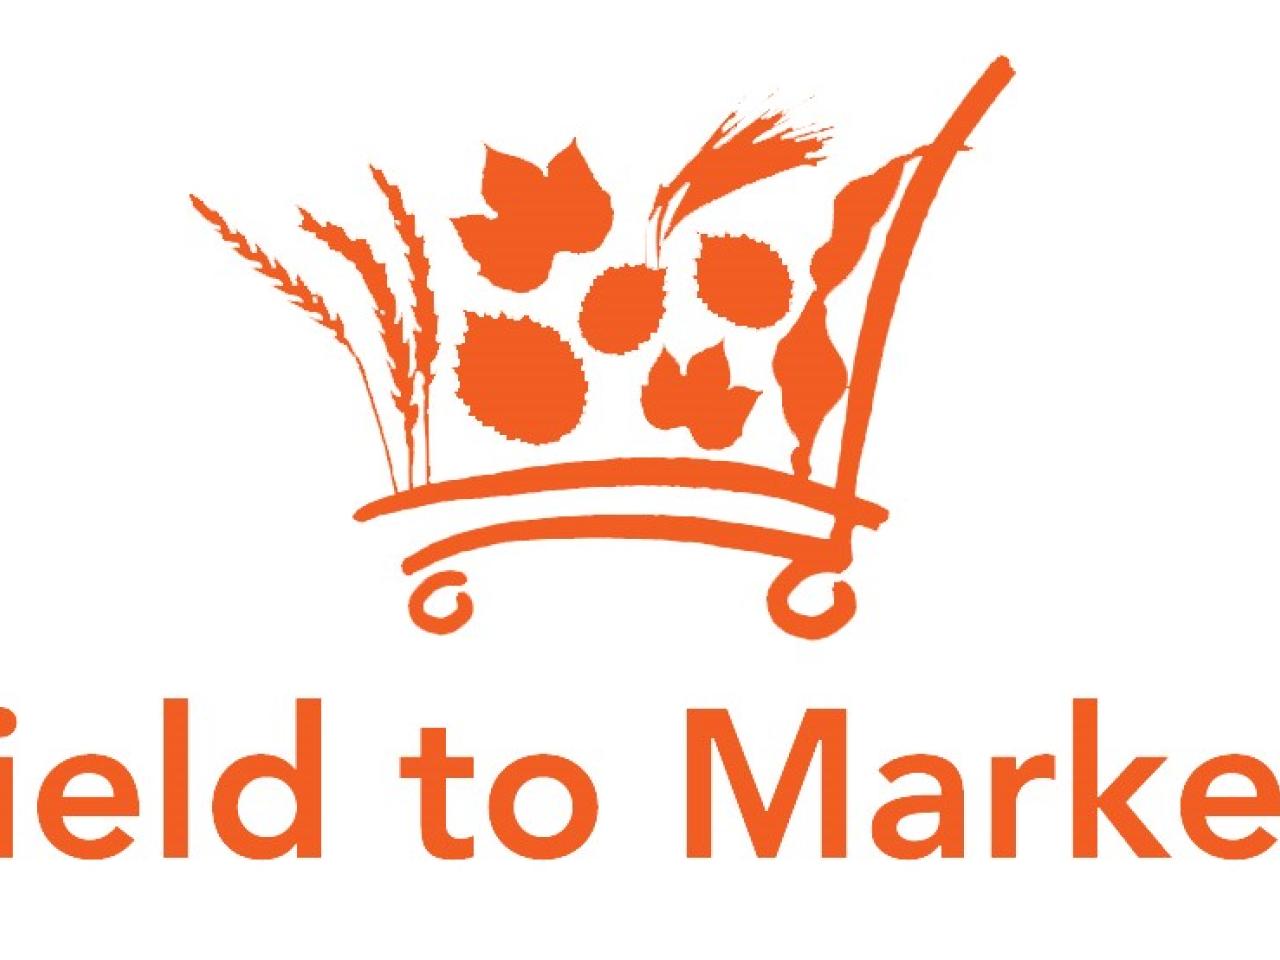 Field to Market: The Alliance for Sustainable Agriculture